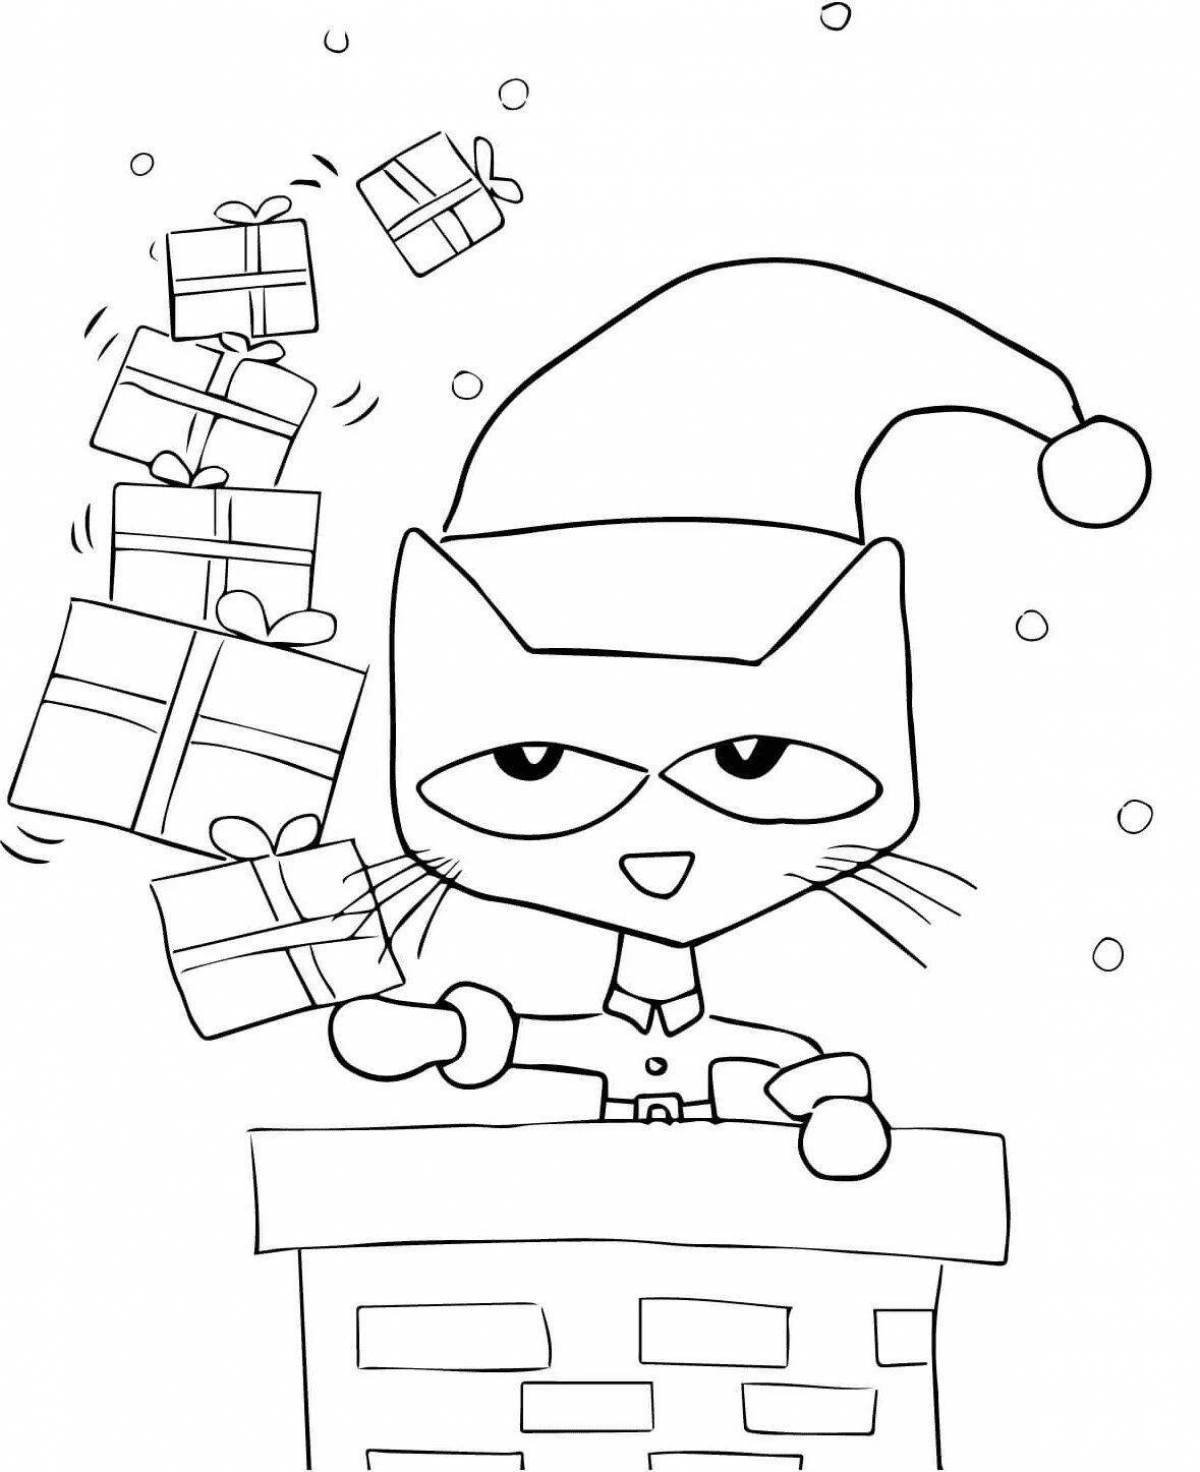 Coloring page witty cat in a box